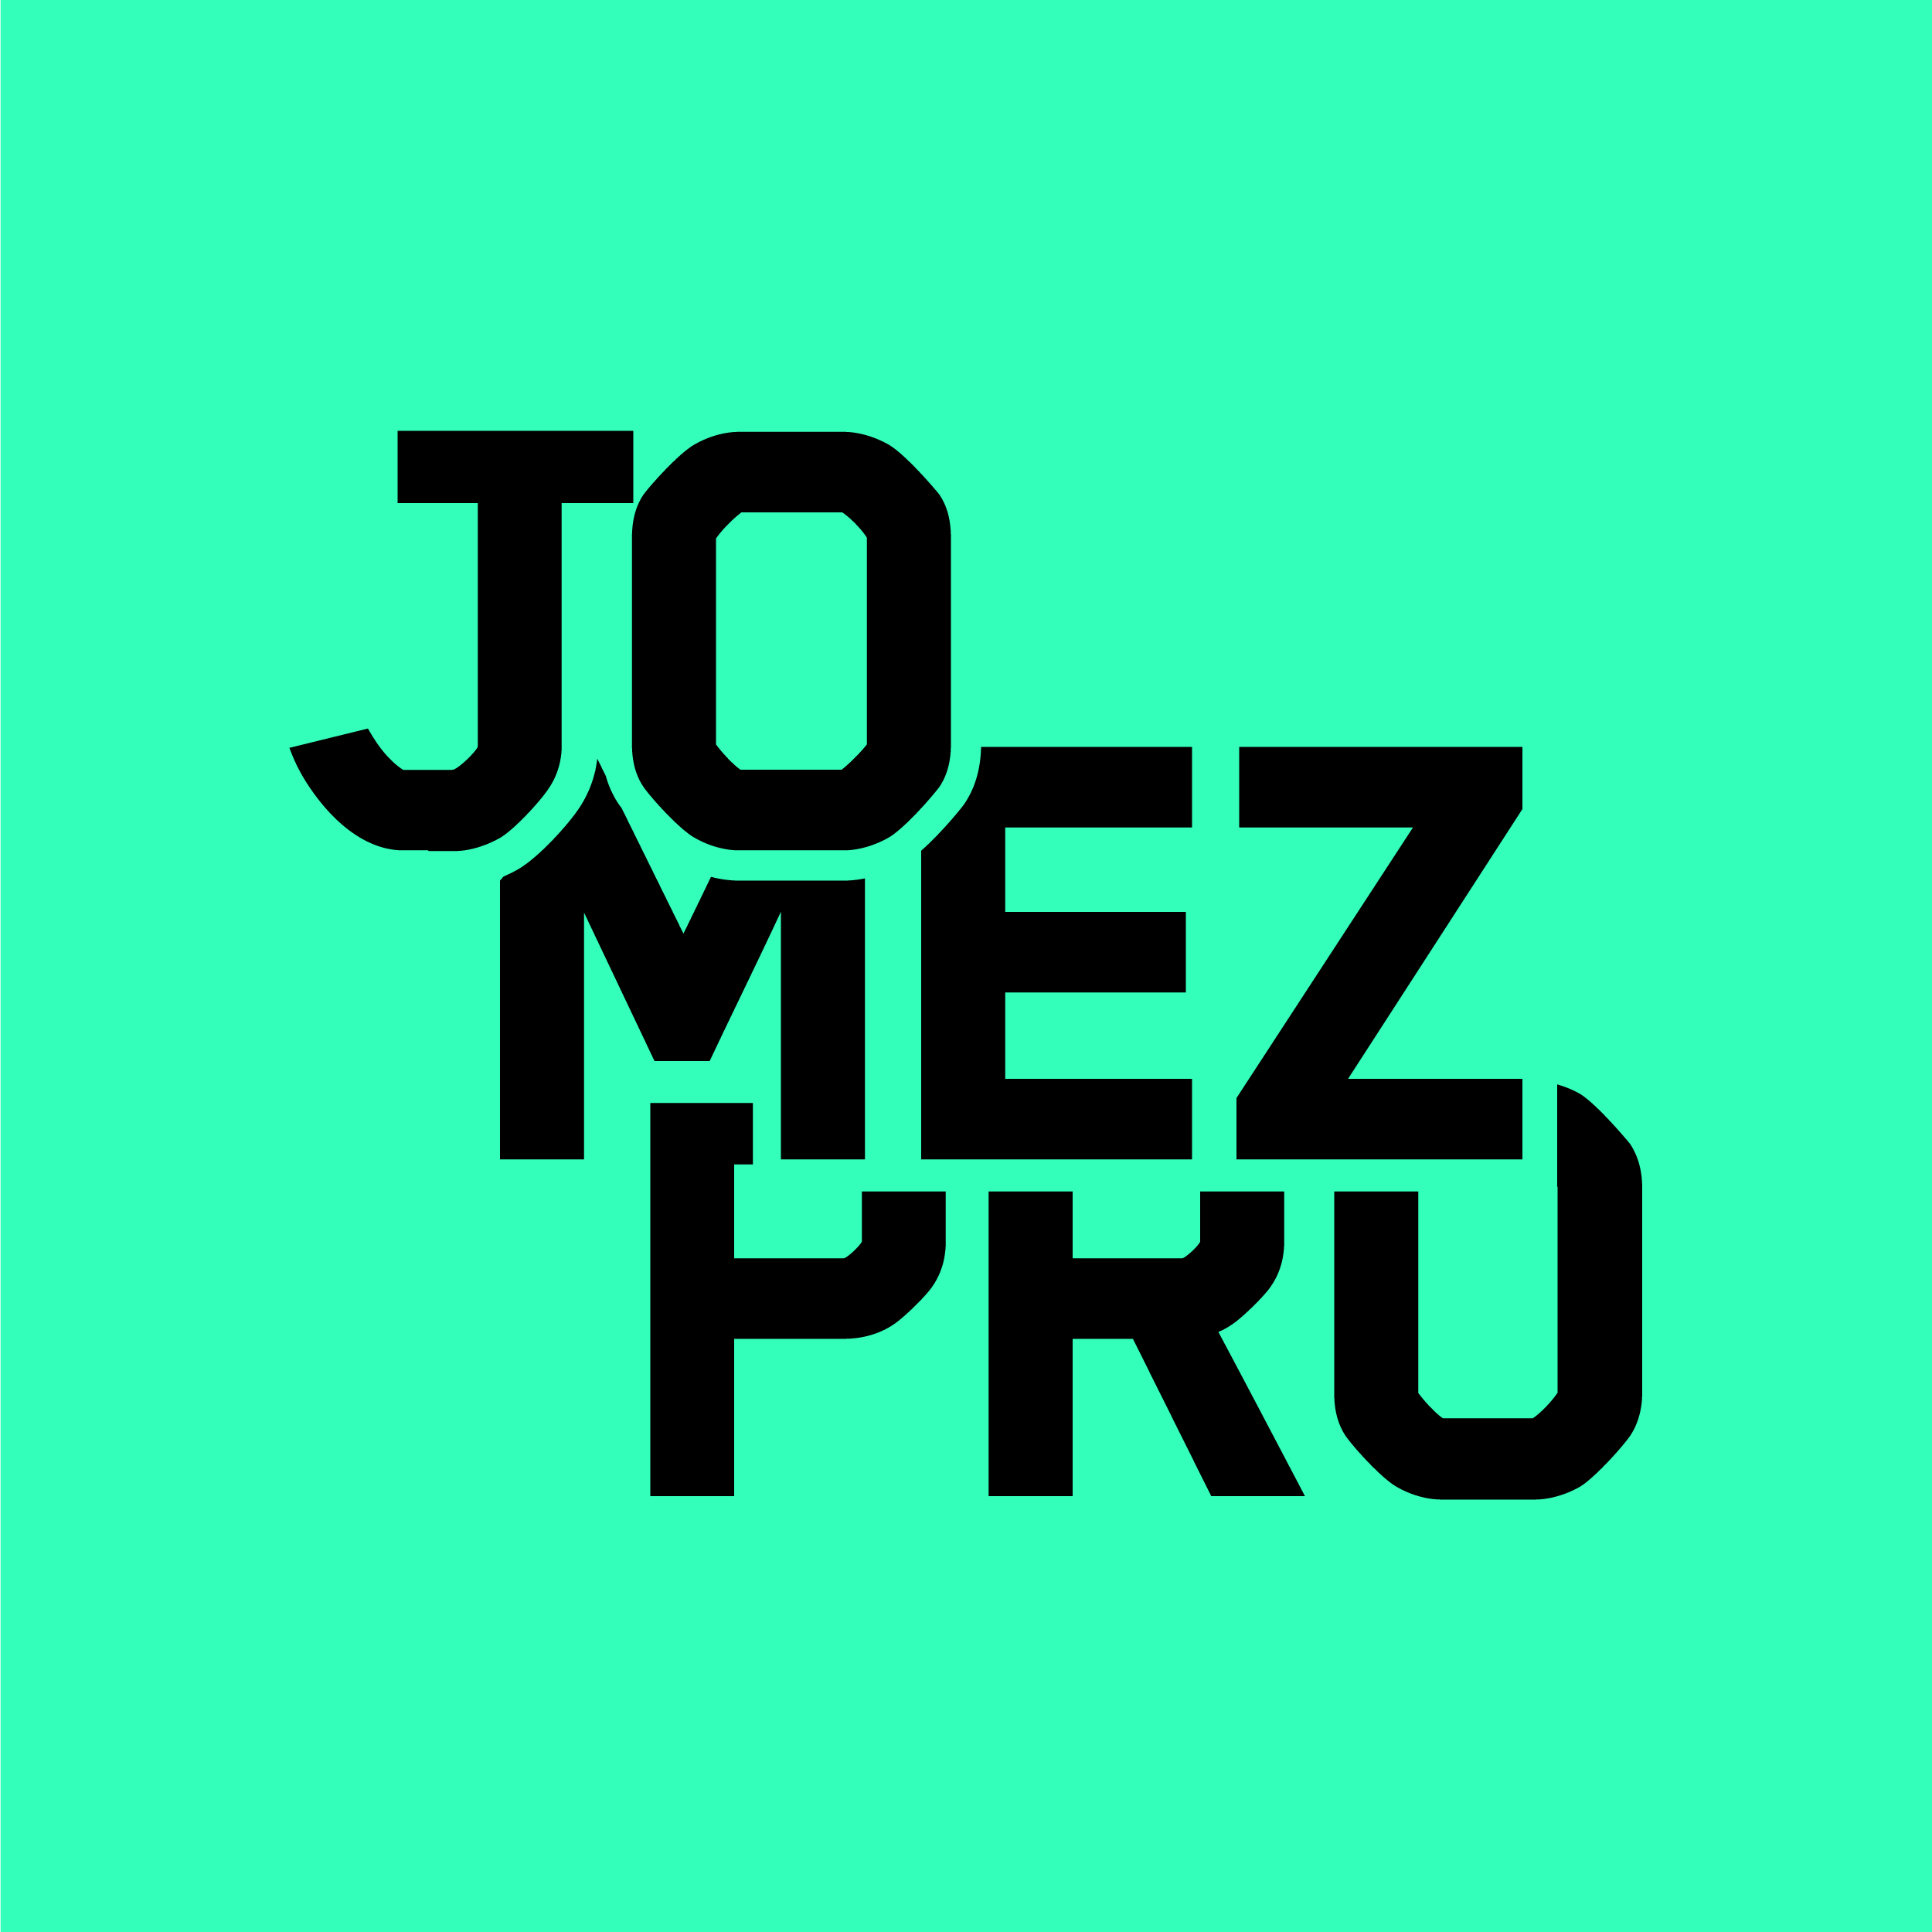 01-jomezpro-logo-primary-color-2020.png